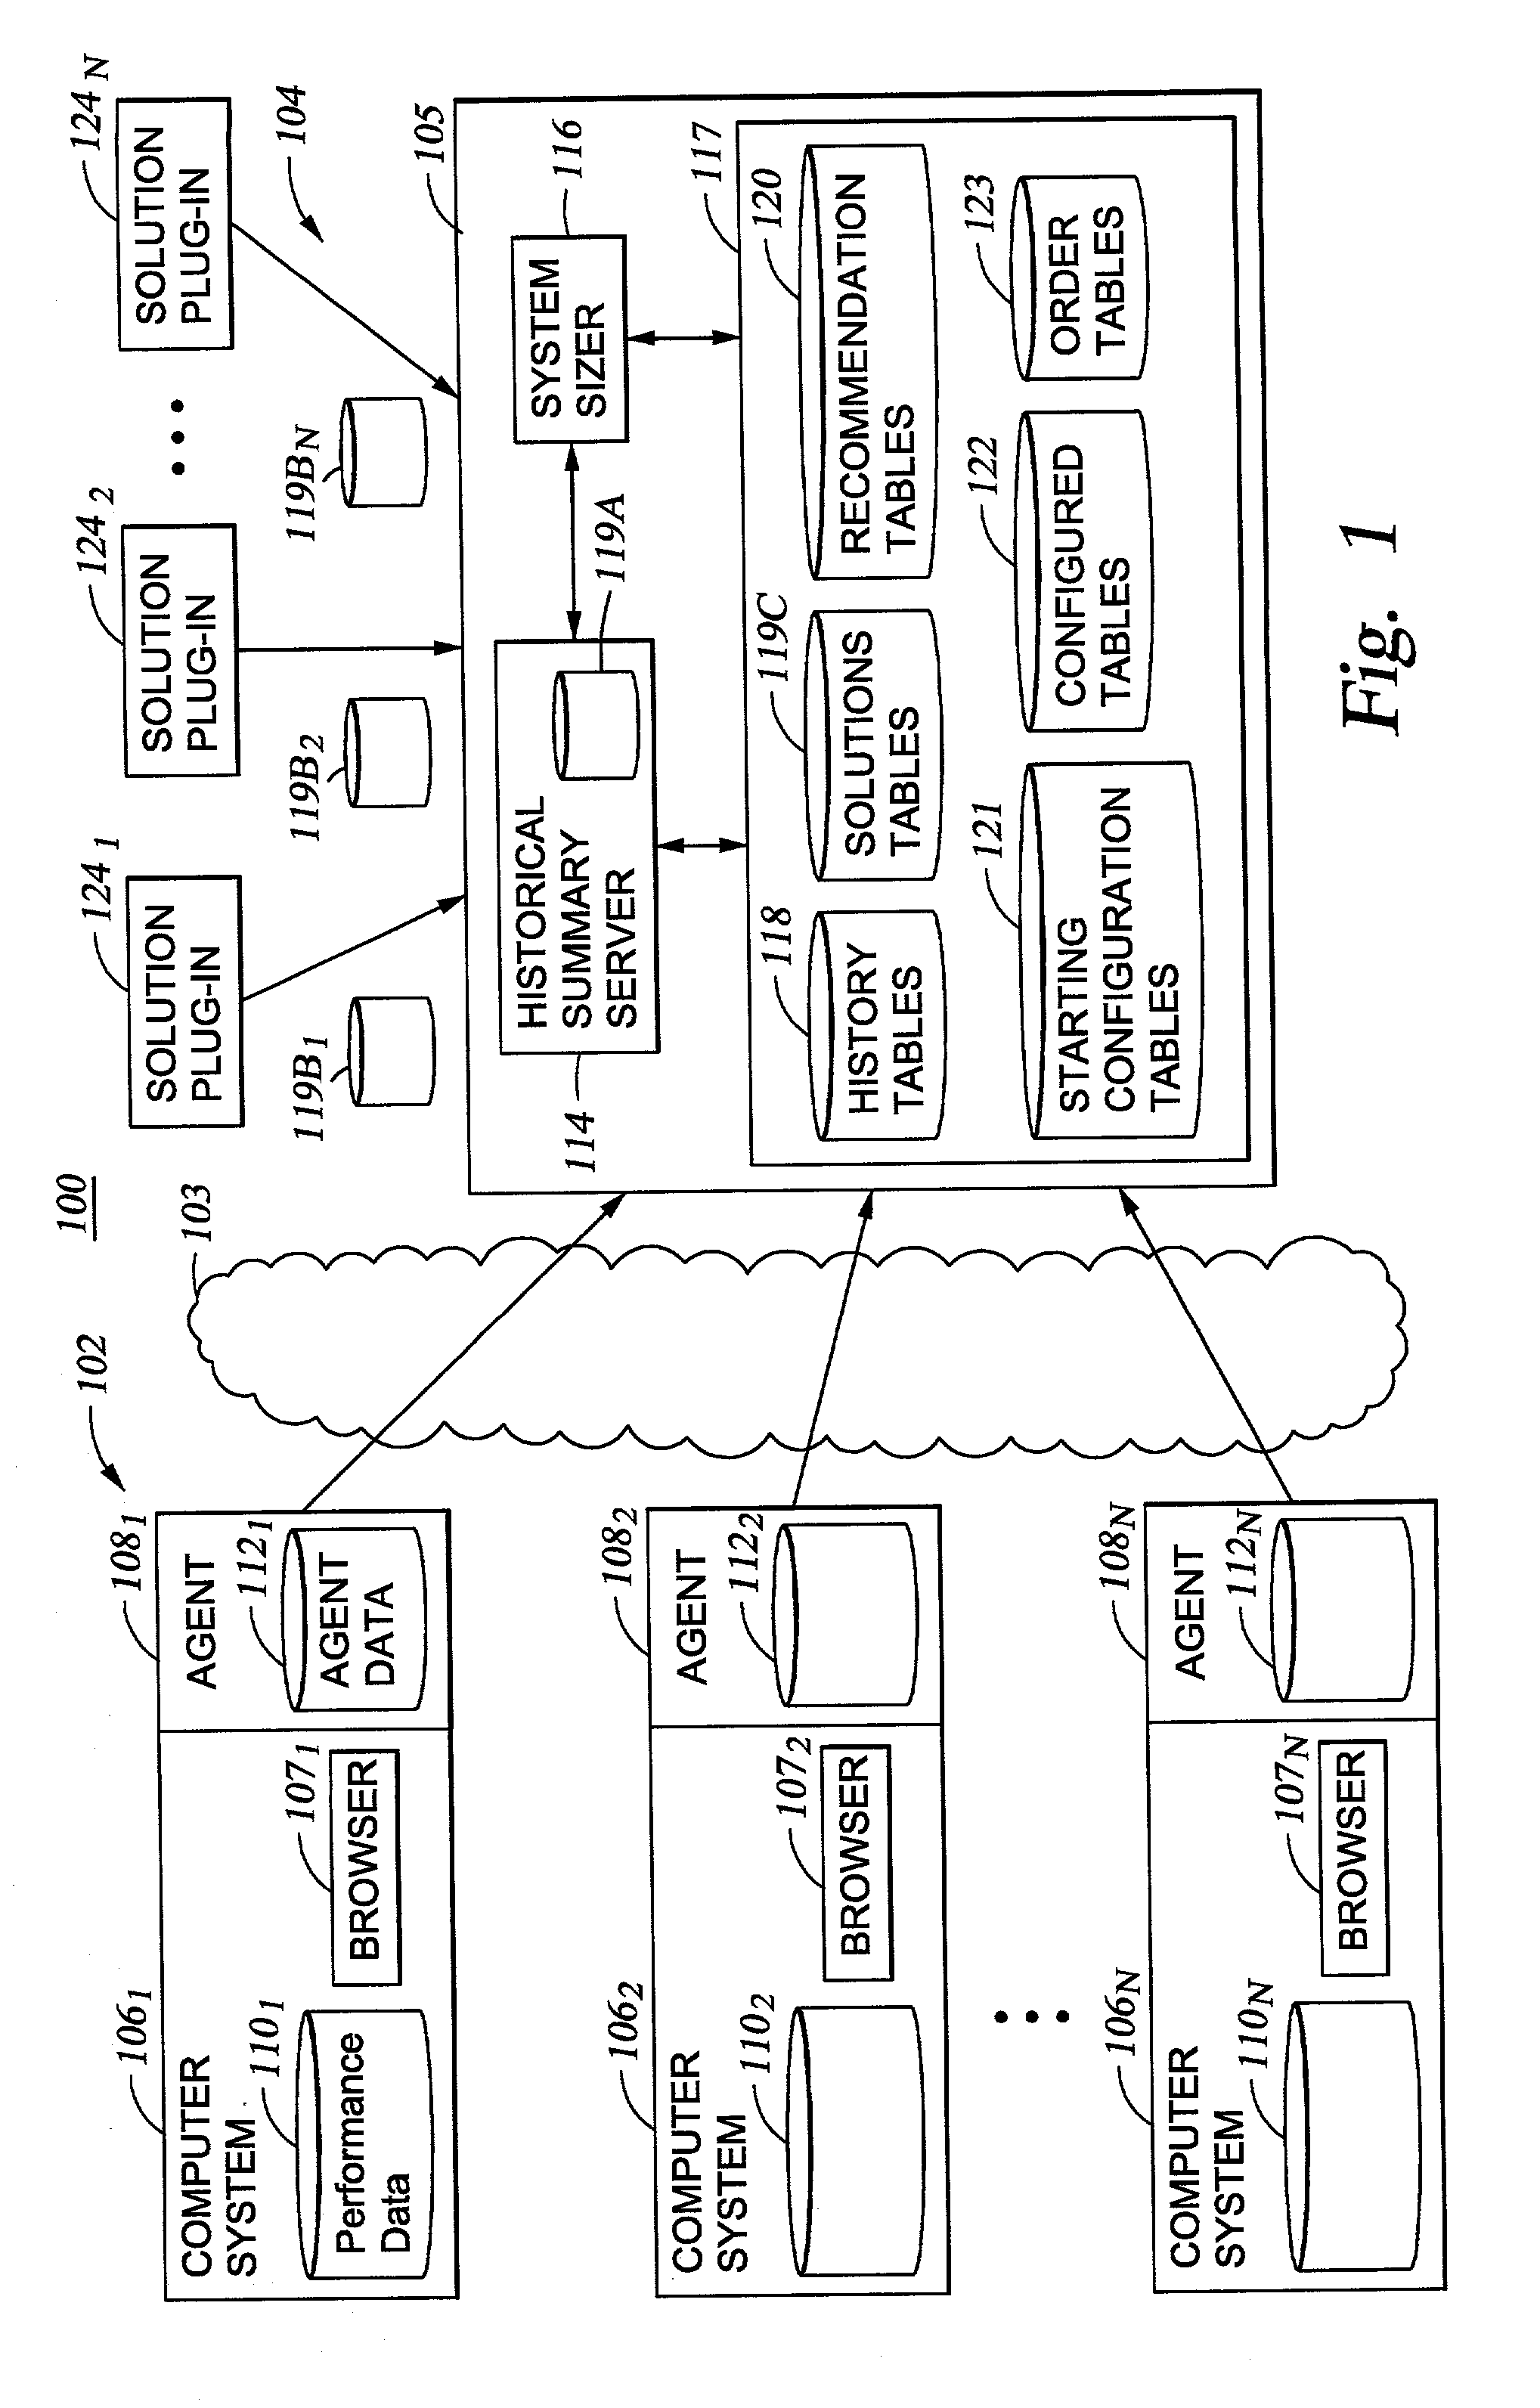 Method and apparatus for automating software upgrades